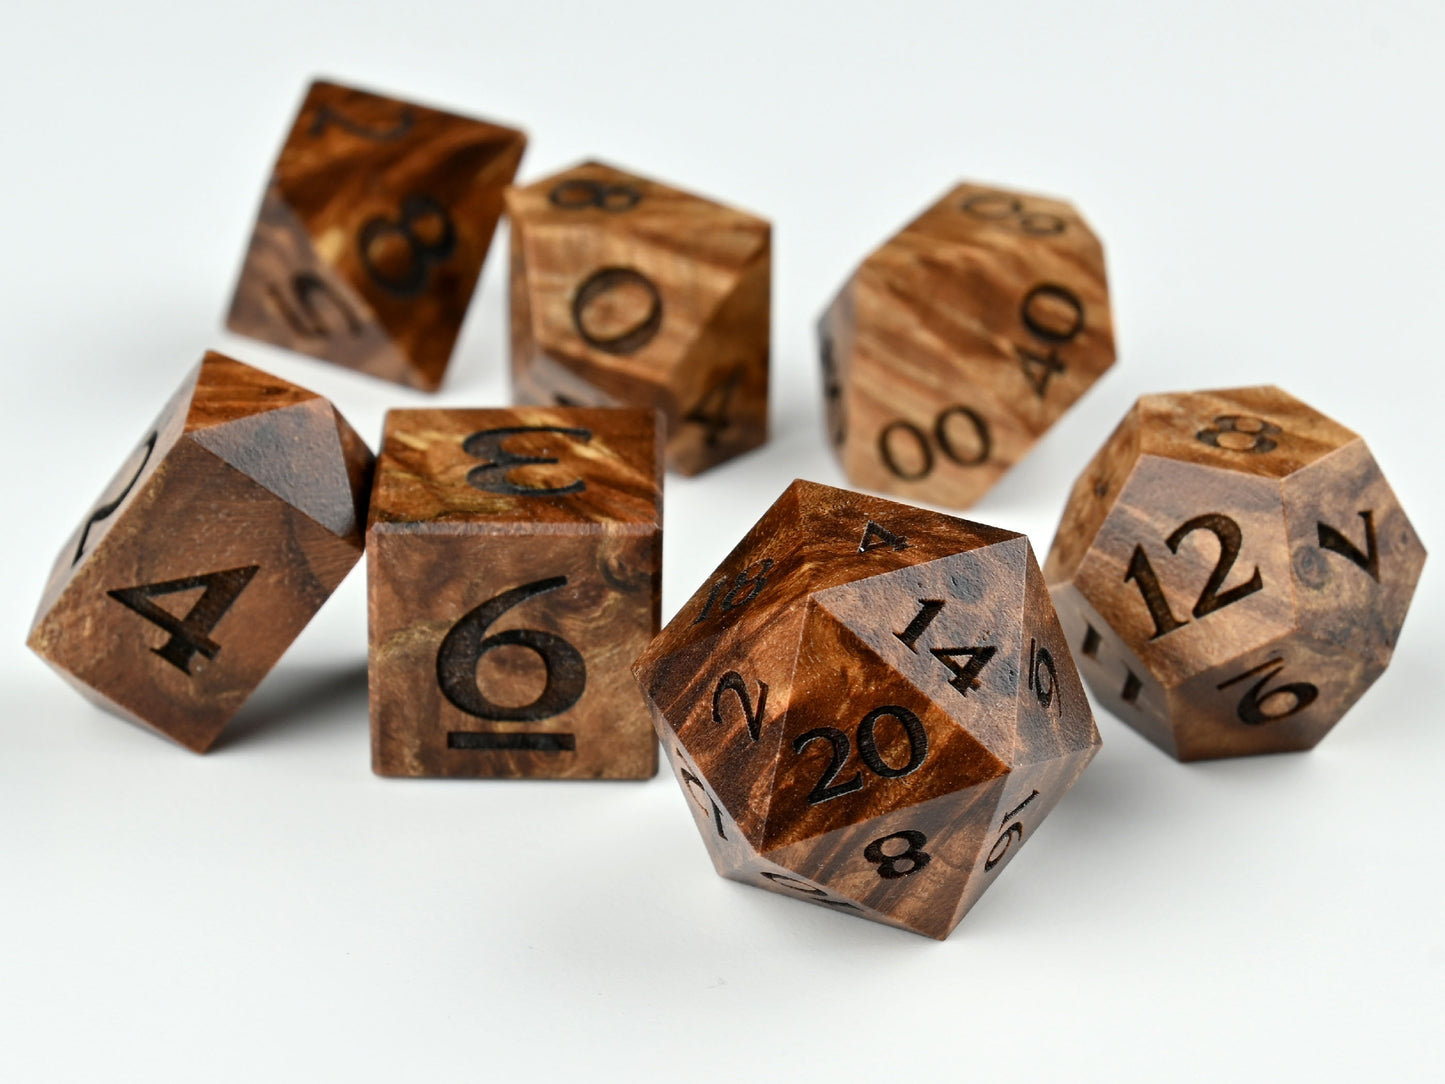 Stabilized Maple burl polyhedral dice set for dungeons and dragons rpg